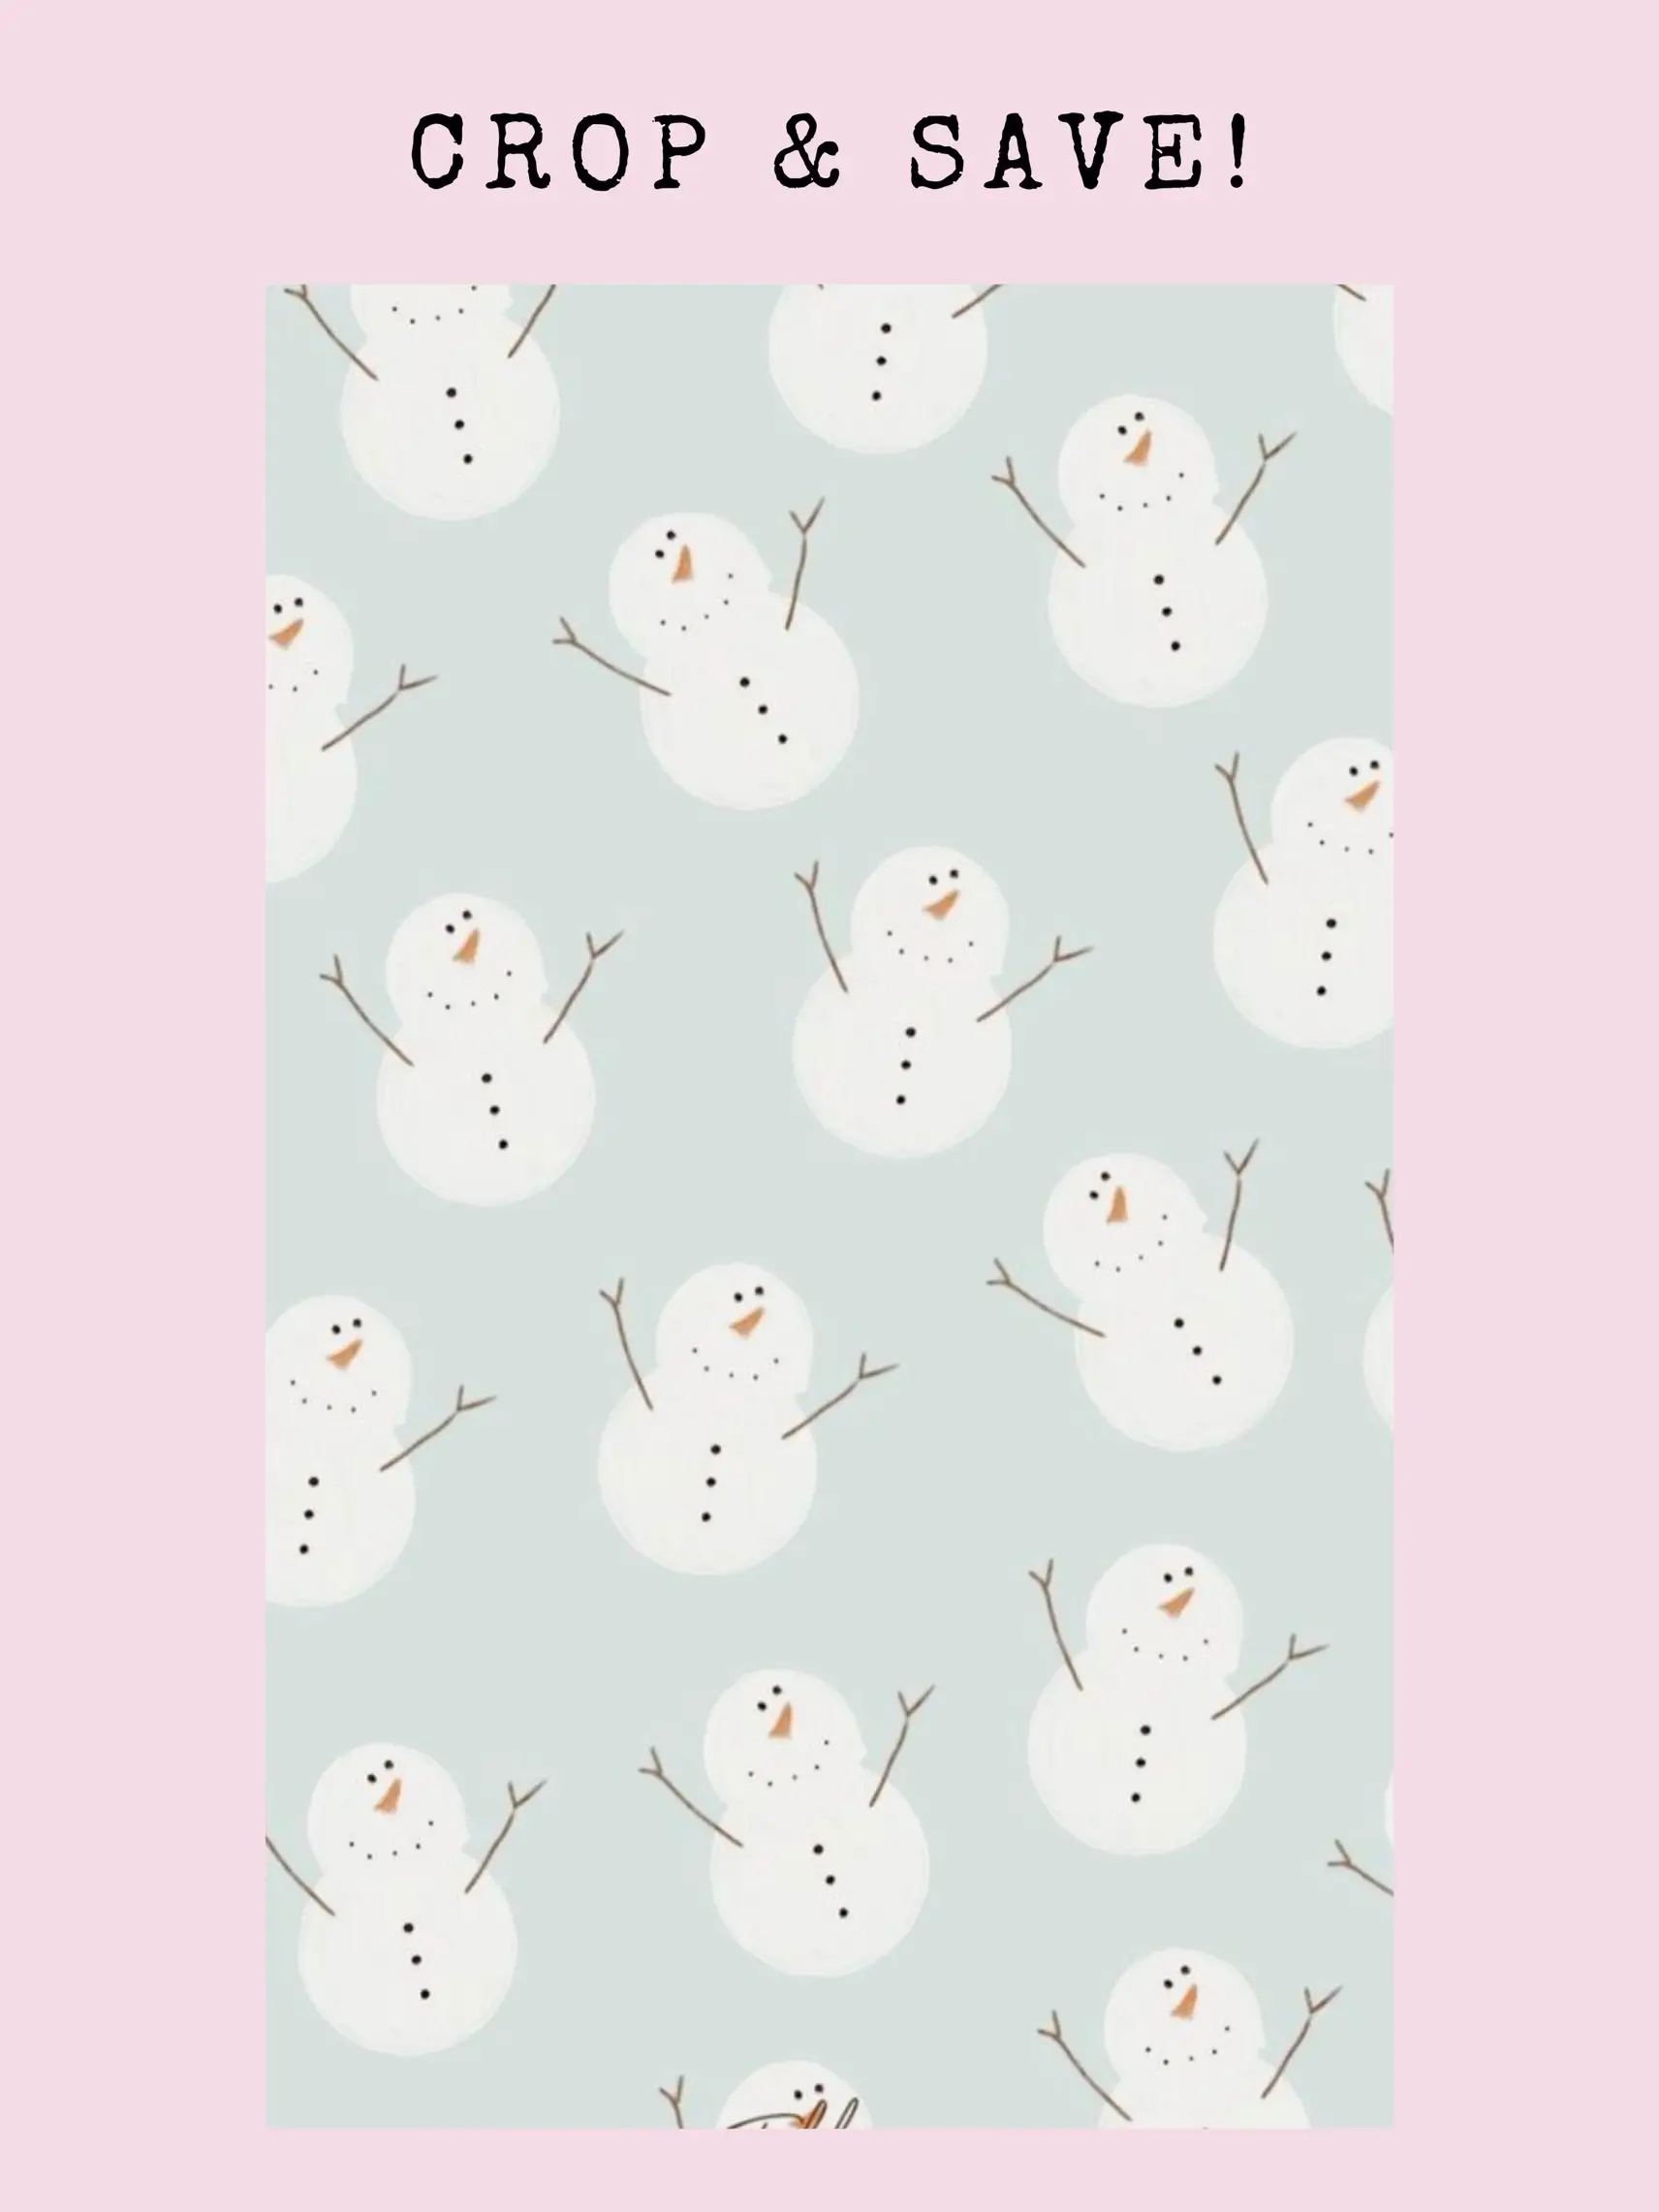 Preppy Christmas wallpaper, Gallery posted by Addy✨🎄🎅